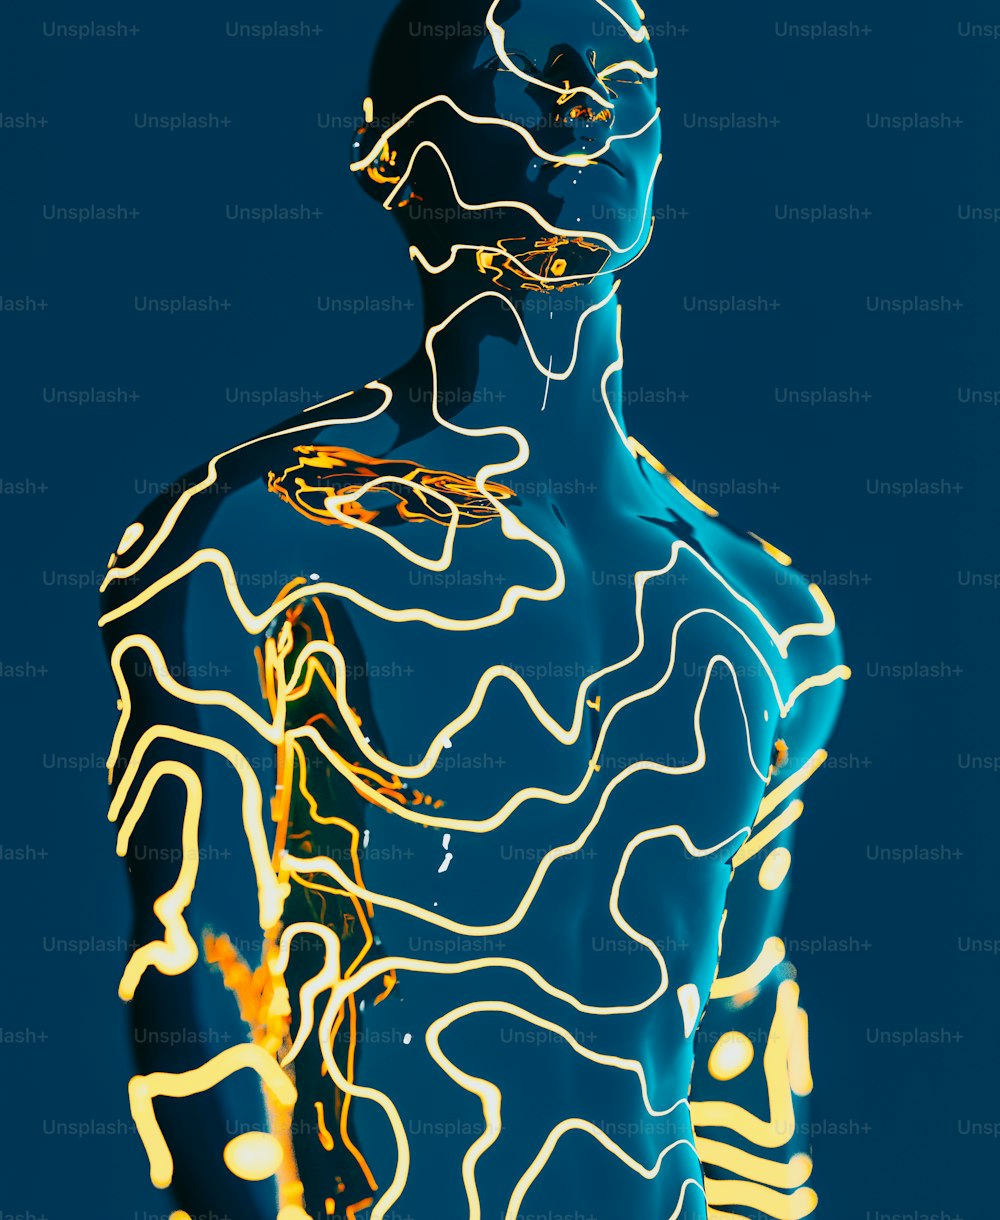 a man's body is shown with lines all over it